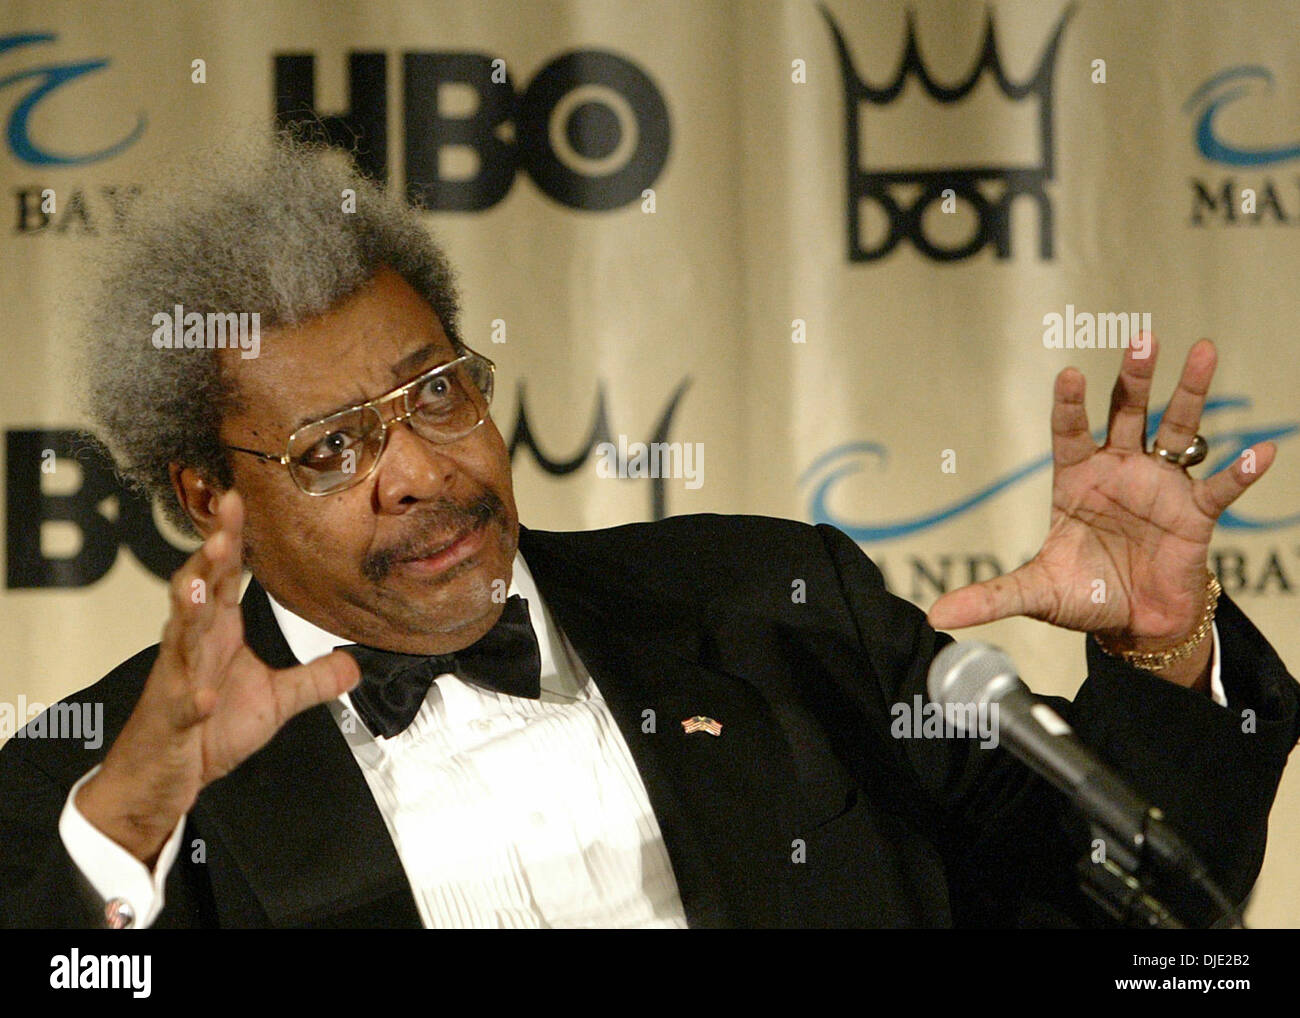 Mar 03, 2004; Los Angeles, CA, USA; Boxing promoter DON KING at a news  conference held at the Marriott Hotel announcing his upcoming fight night.  The main event will feature WBO heavyweight